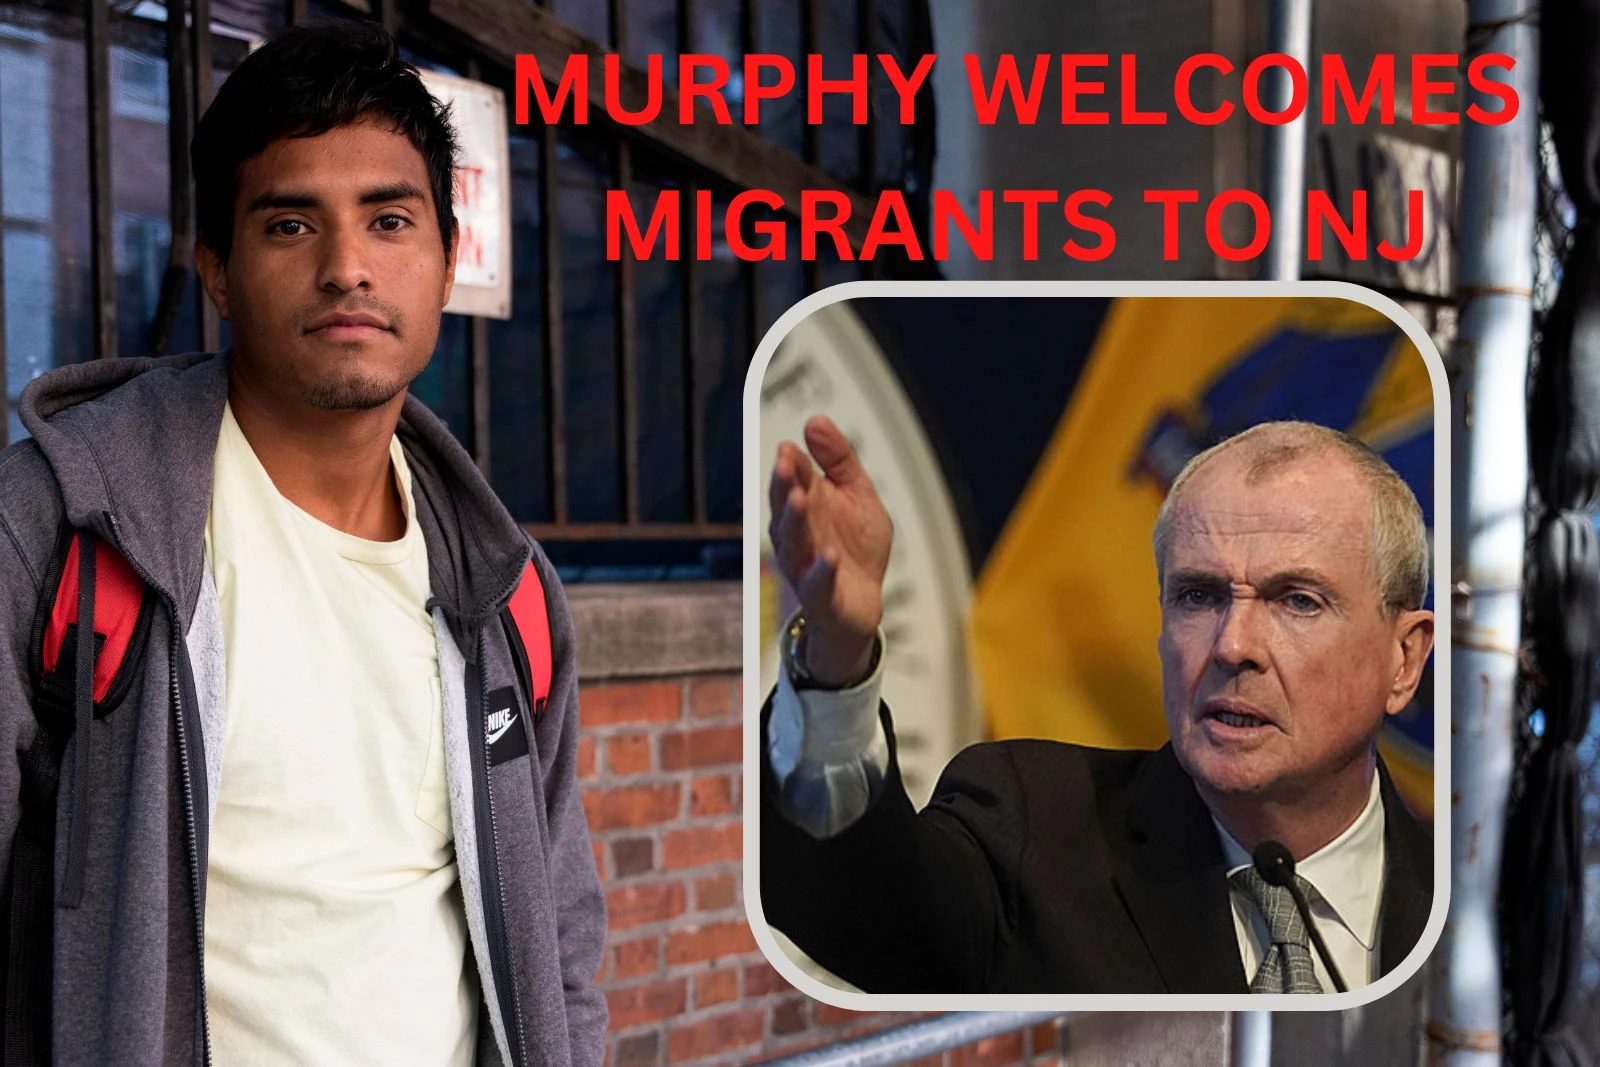 NJ Prepares to Receive Migrants from Florida or Texas